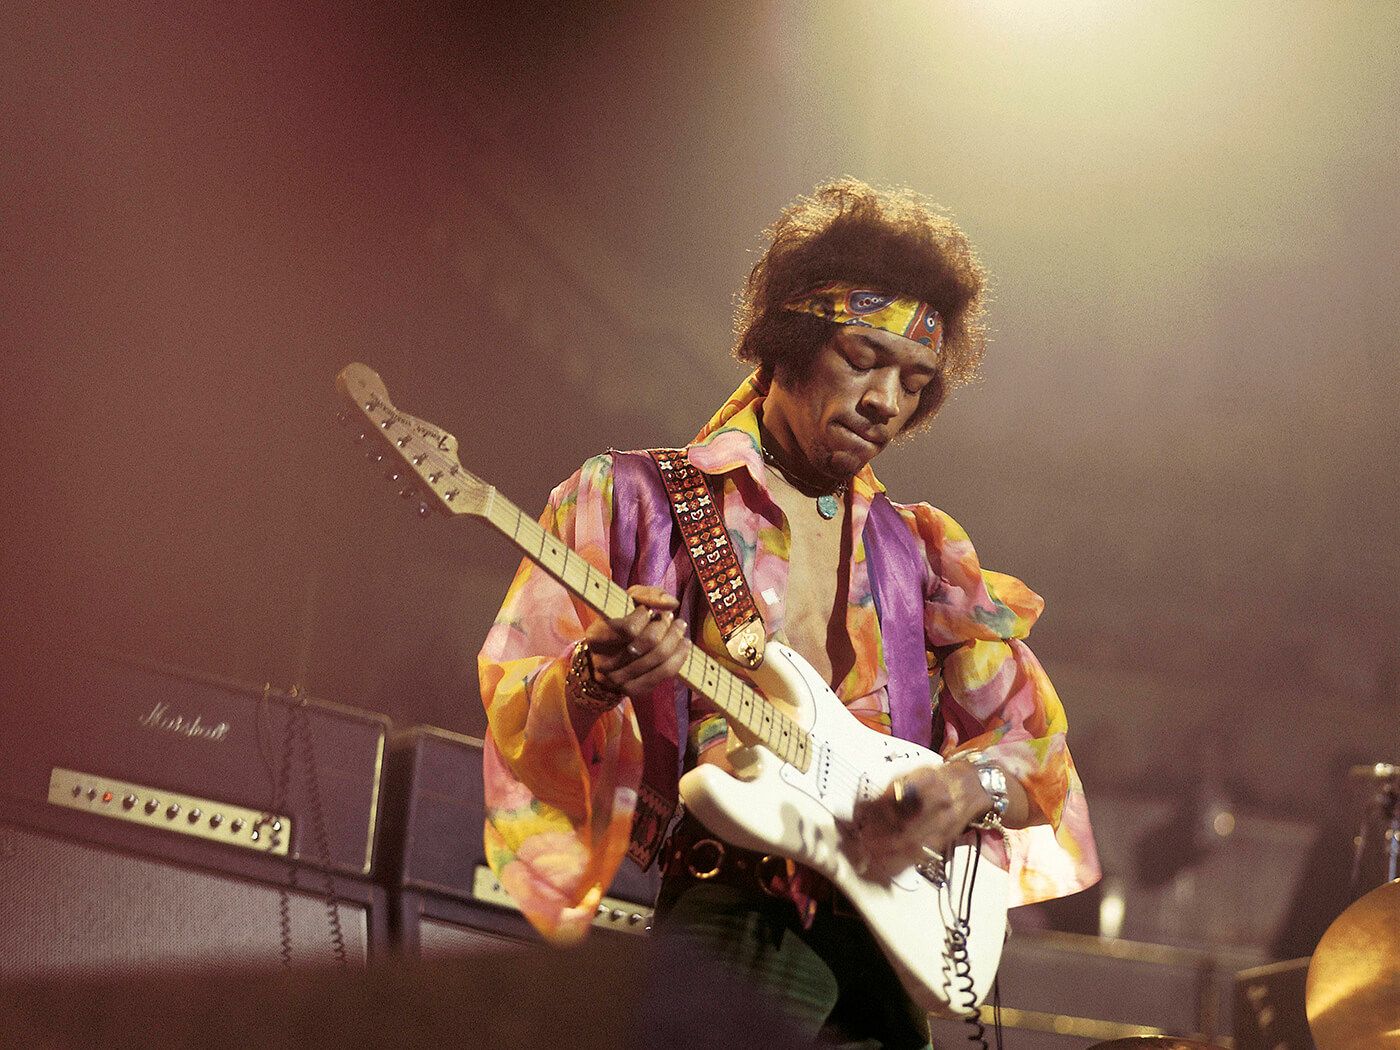 Jimi Hendrix’s ‘Star Spangled Banner’ Will Be Released Via AR In Support Of Black Lives Matter